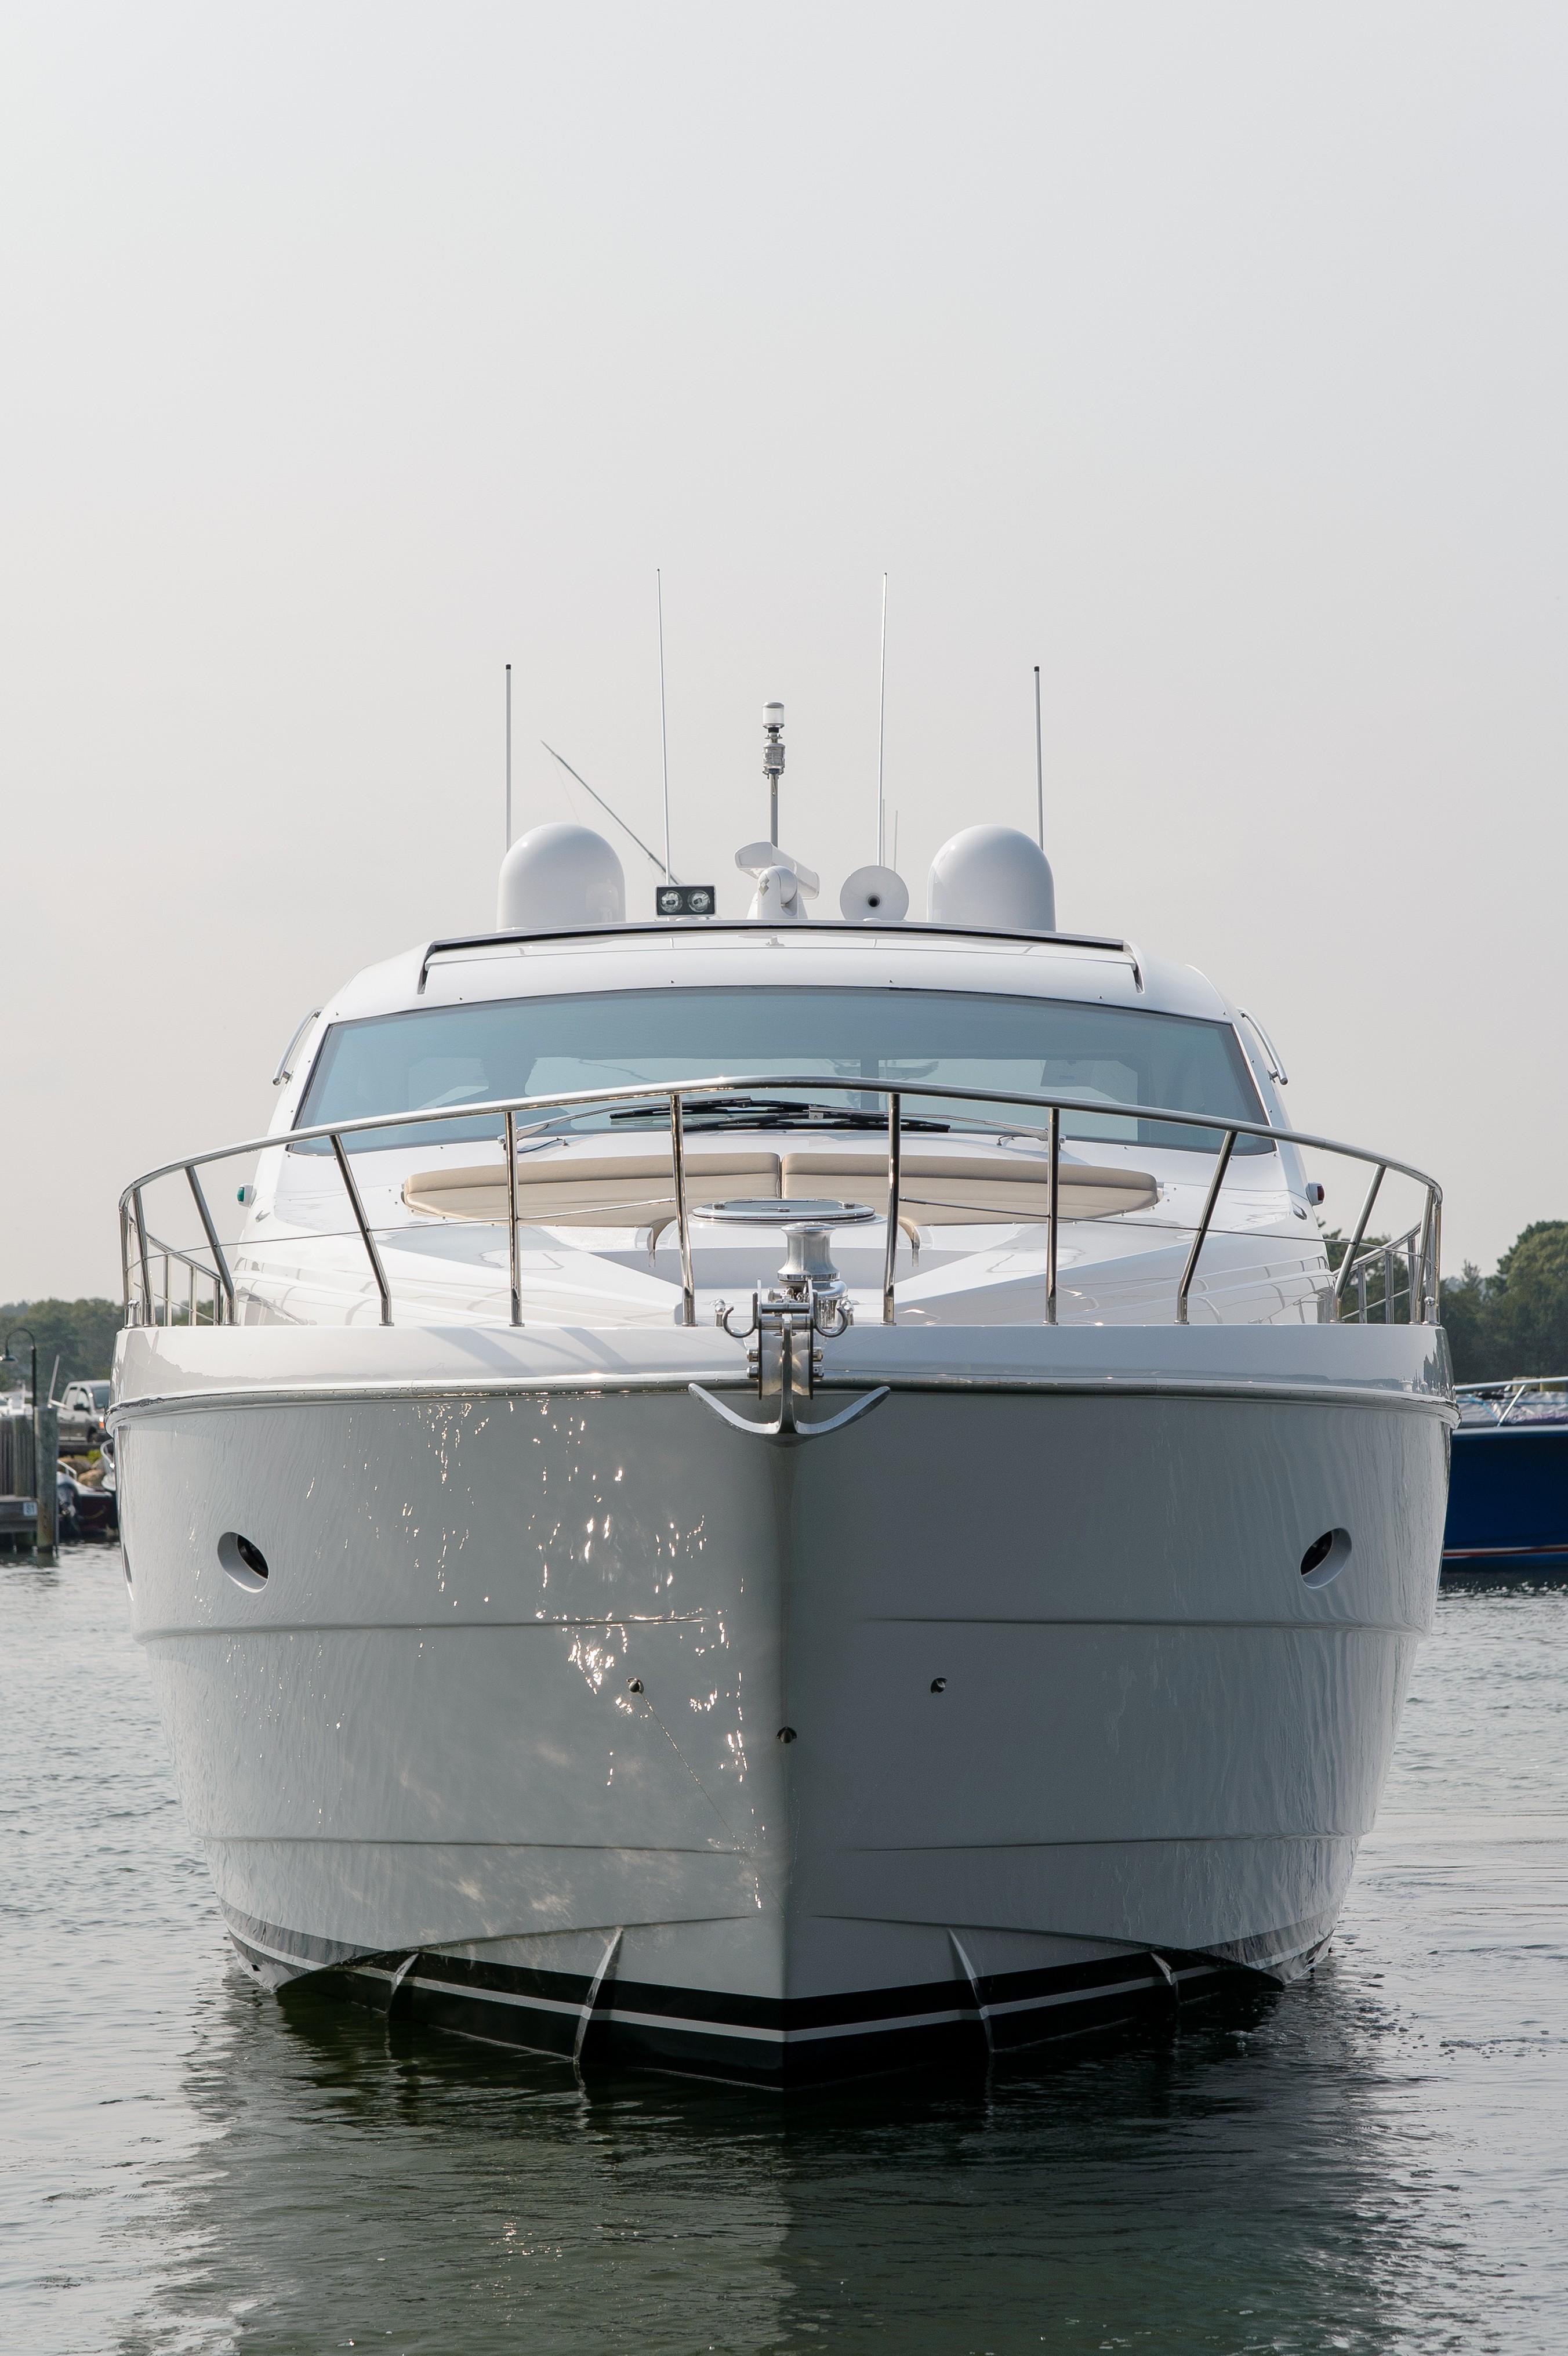 64 ft yacht for sale